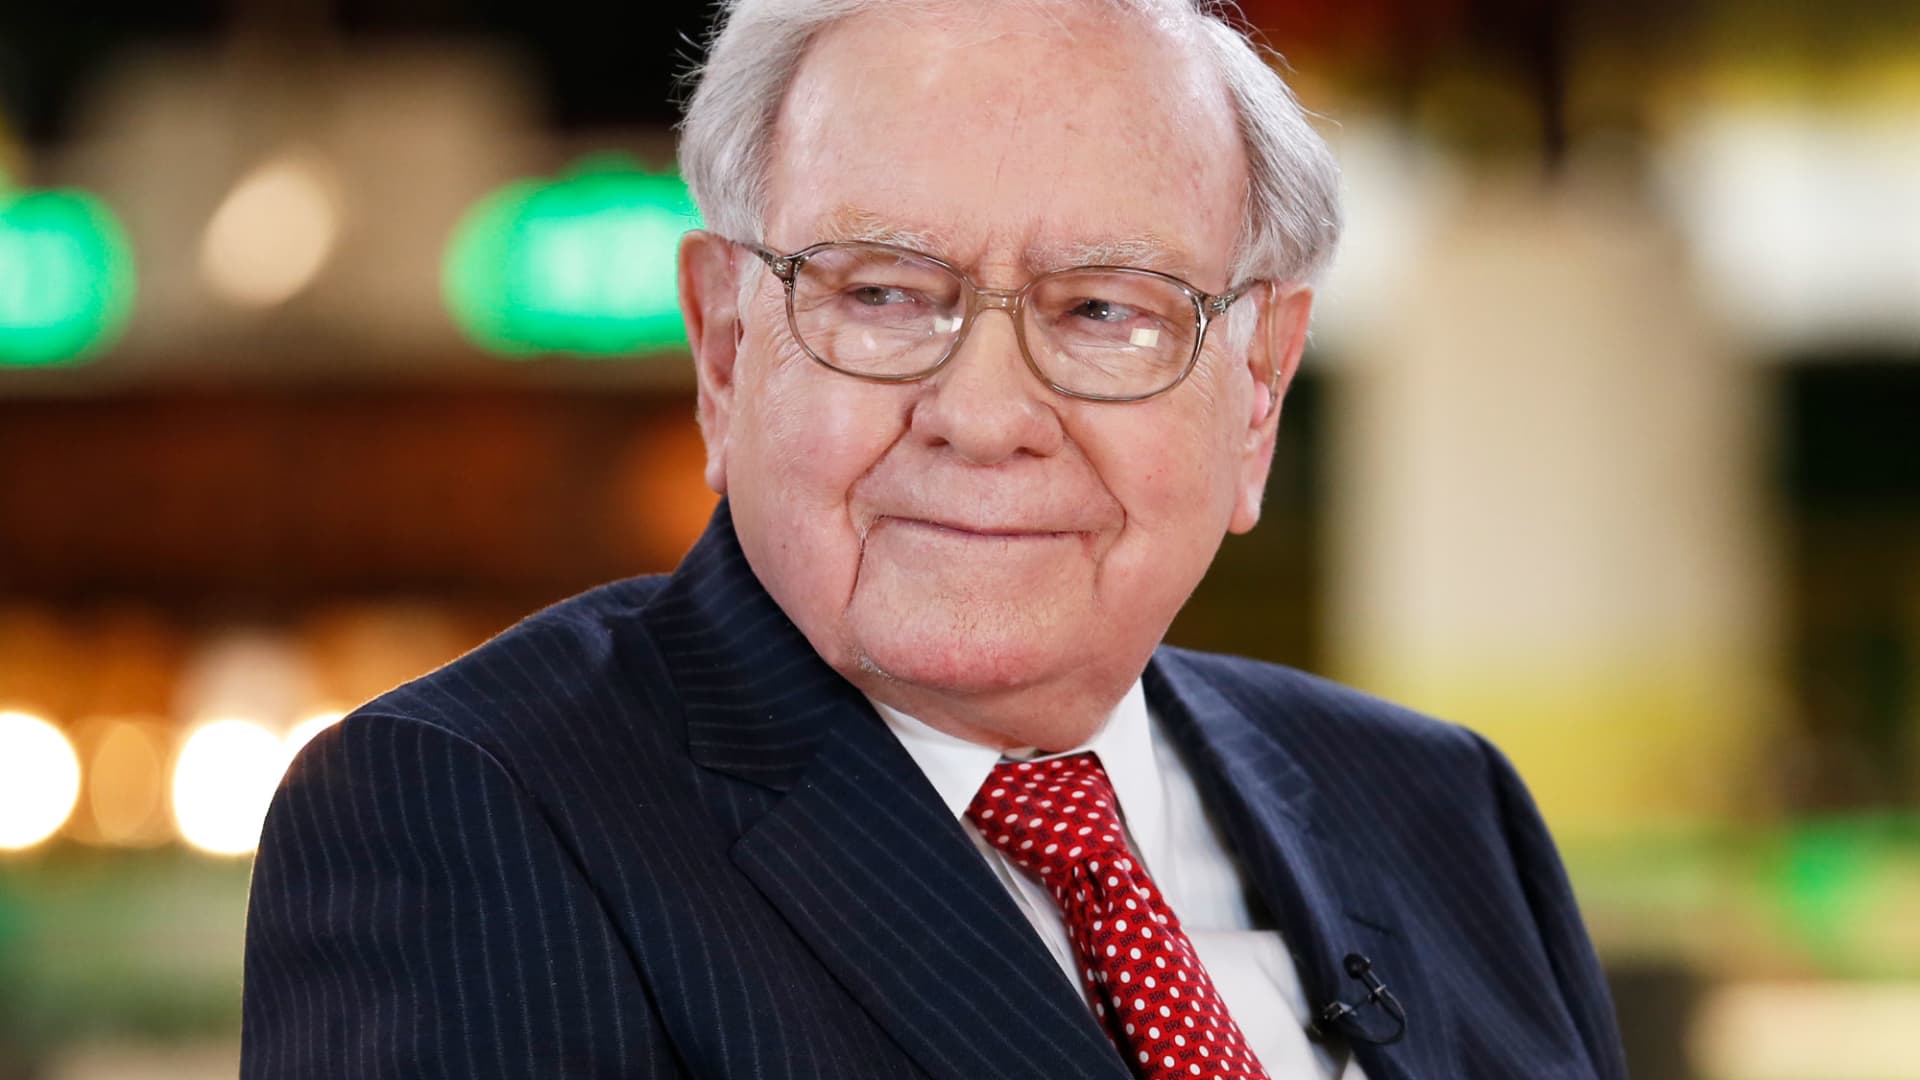 Warren Buffett says bitcoin is 'probably rat poison squared'